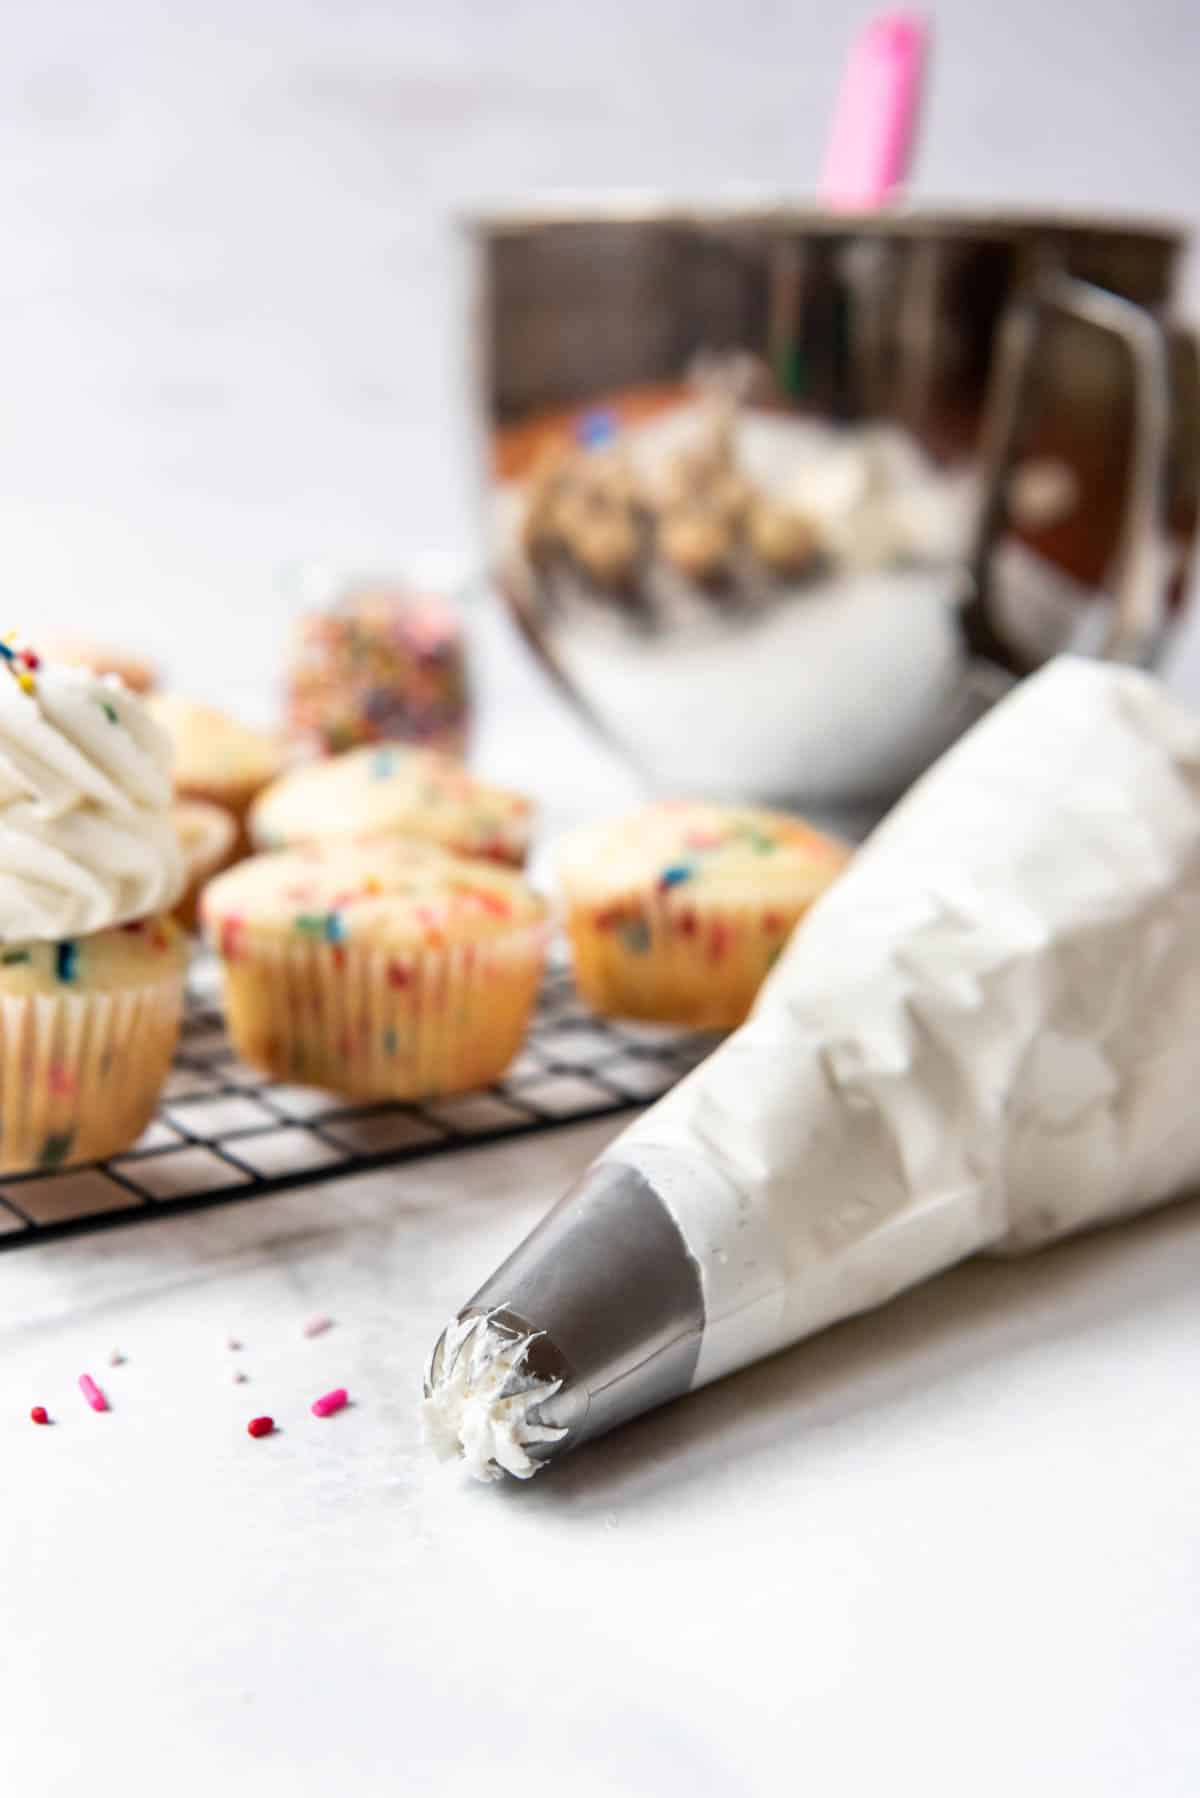 A piping bag filled with white Swiss meringue buttercream and fitted with a closed star piping tip in front of cupcakes ready for decorating.